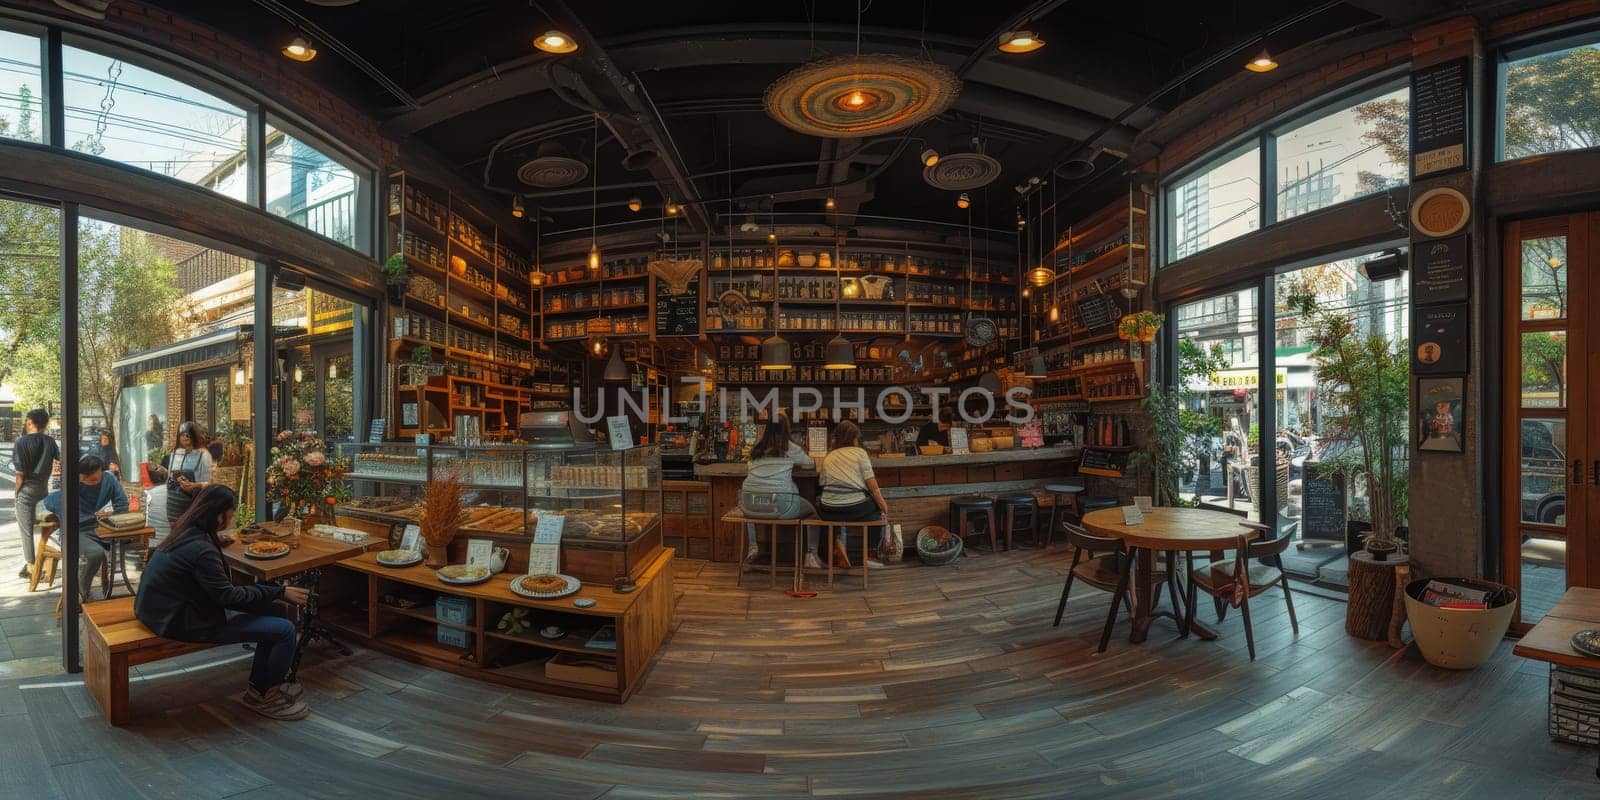 Cafe bar restaurant nobody indoor. Empty coffee shop interior daytime with wooden design counter red brick wall in background